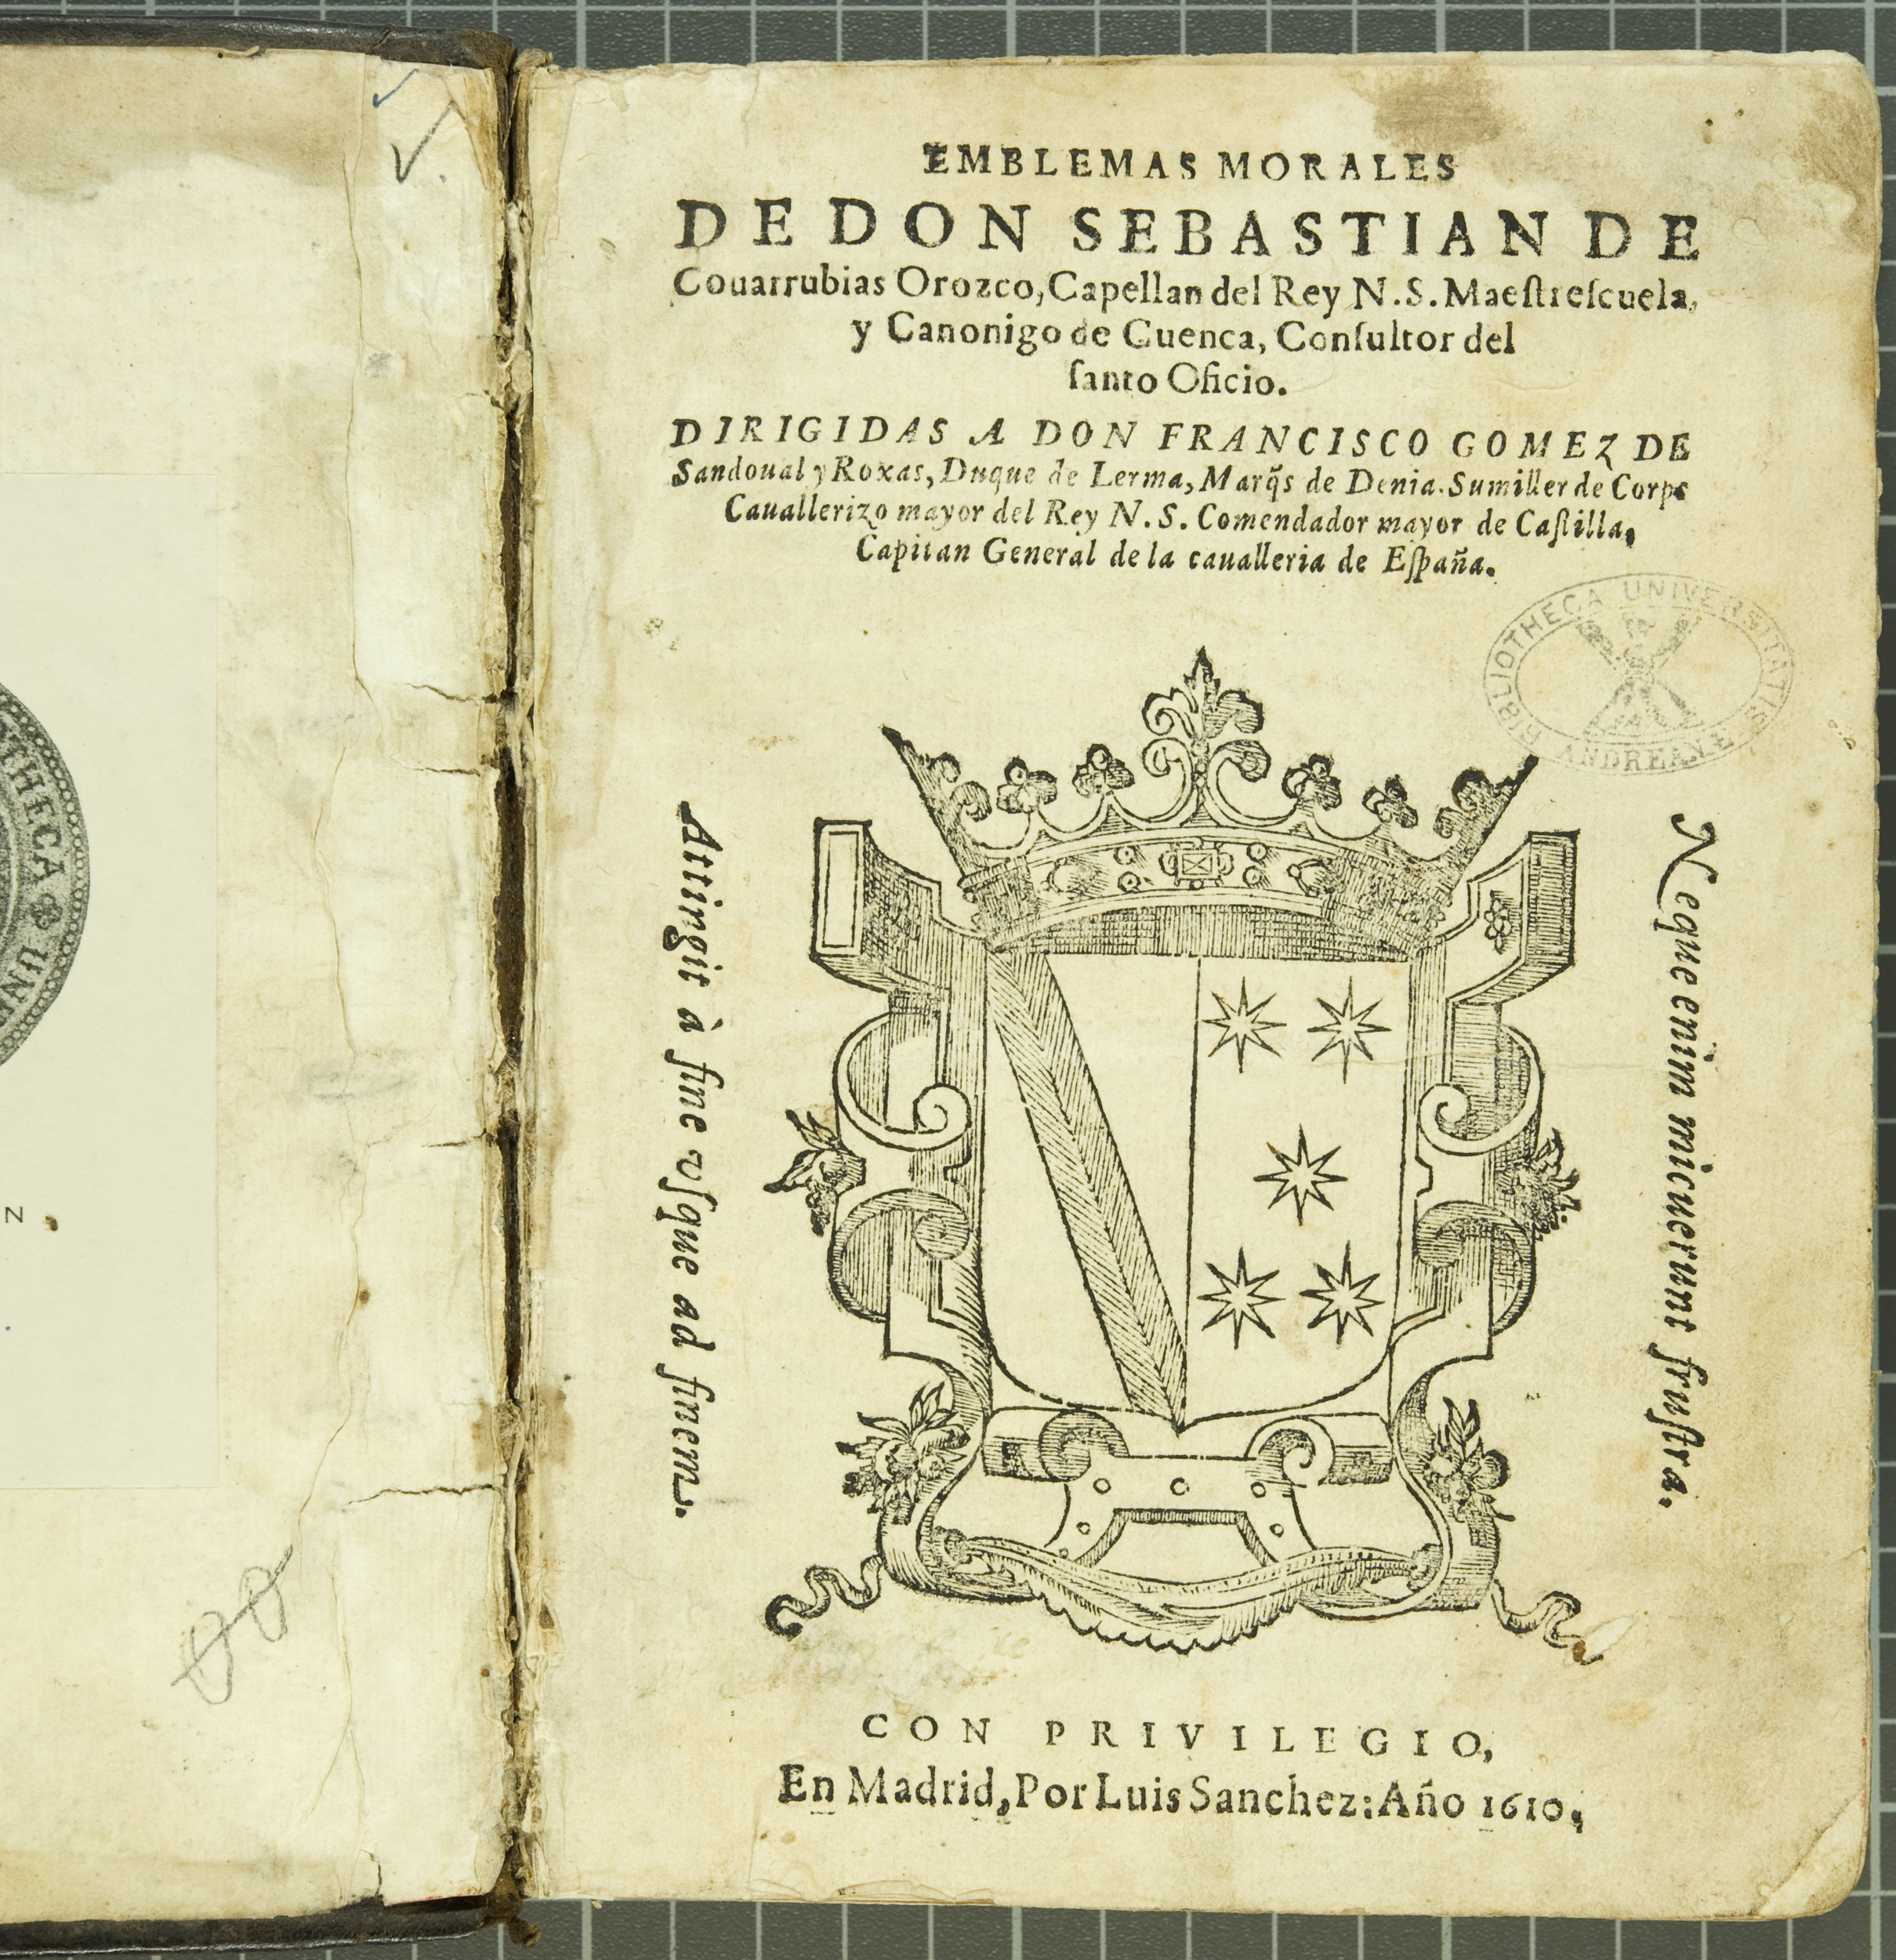 The title page of Covarrubias's Emblemas morales (1610).